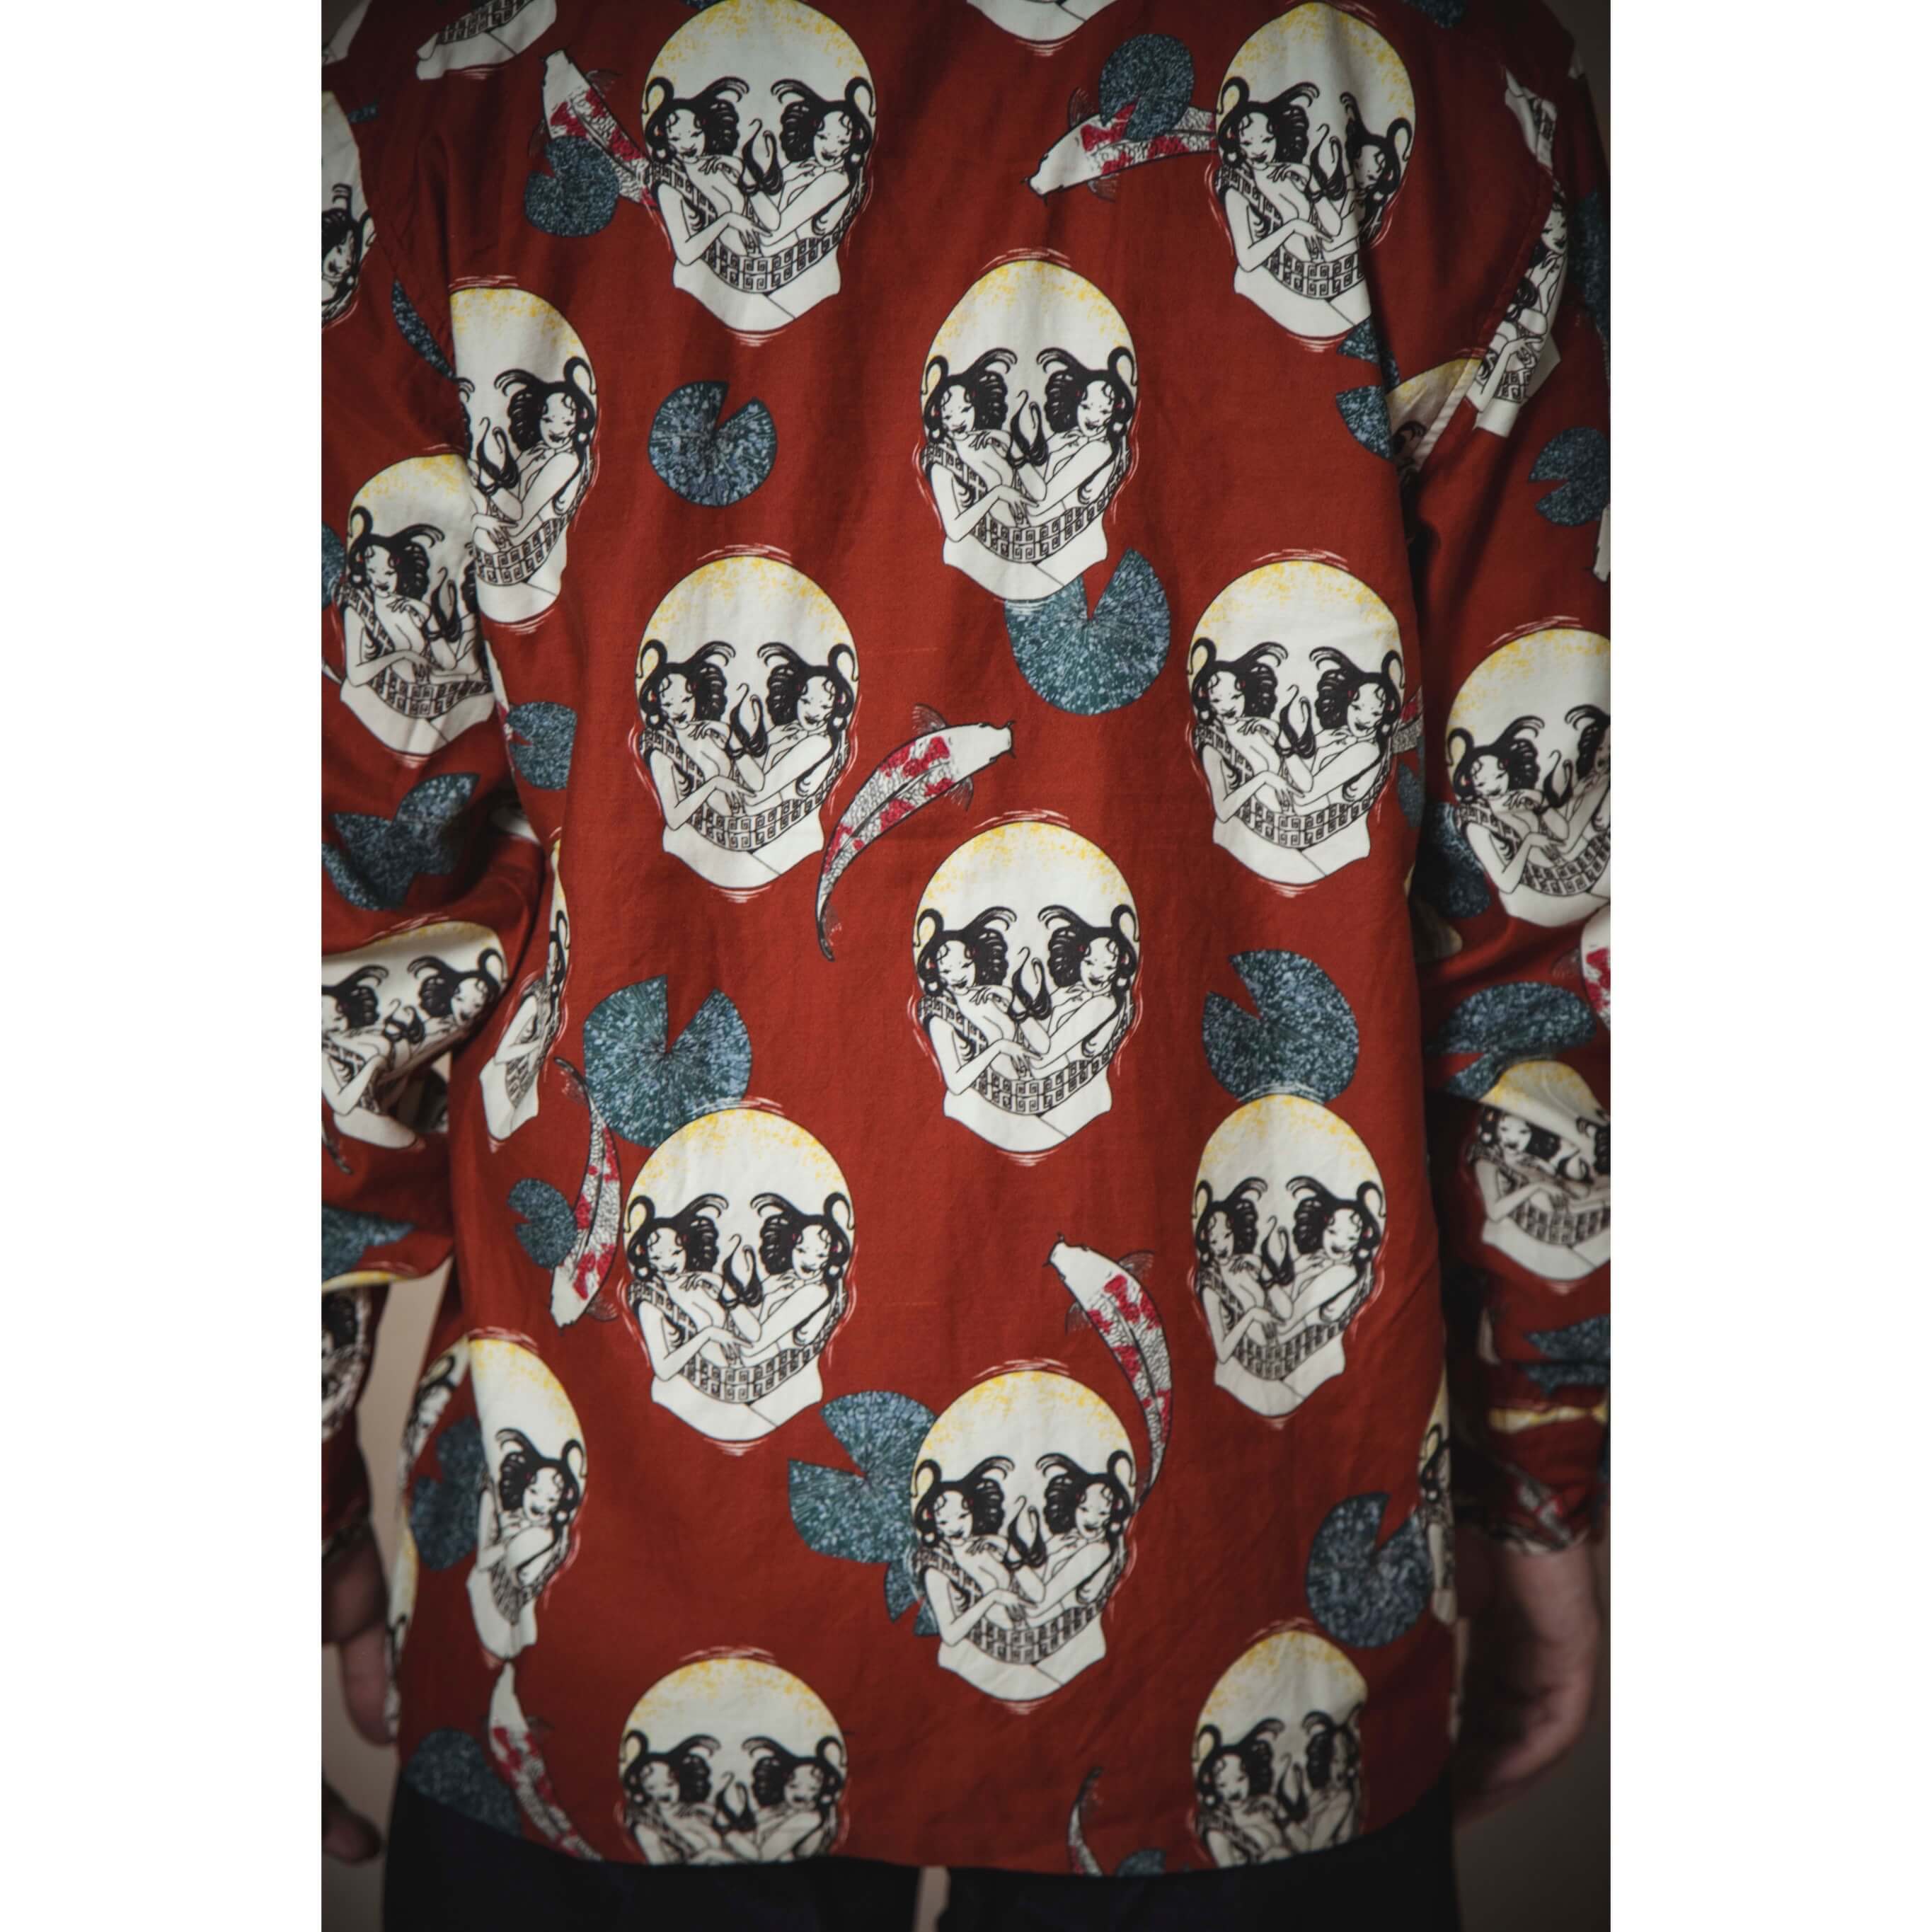 New name! ONLINE STORE / DRESS HIPPY/FACE TWO SKULL L/S SHIRT (RED)